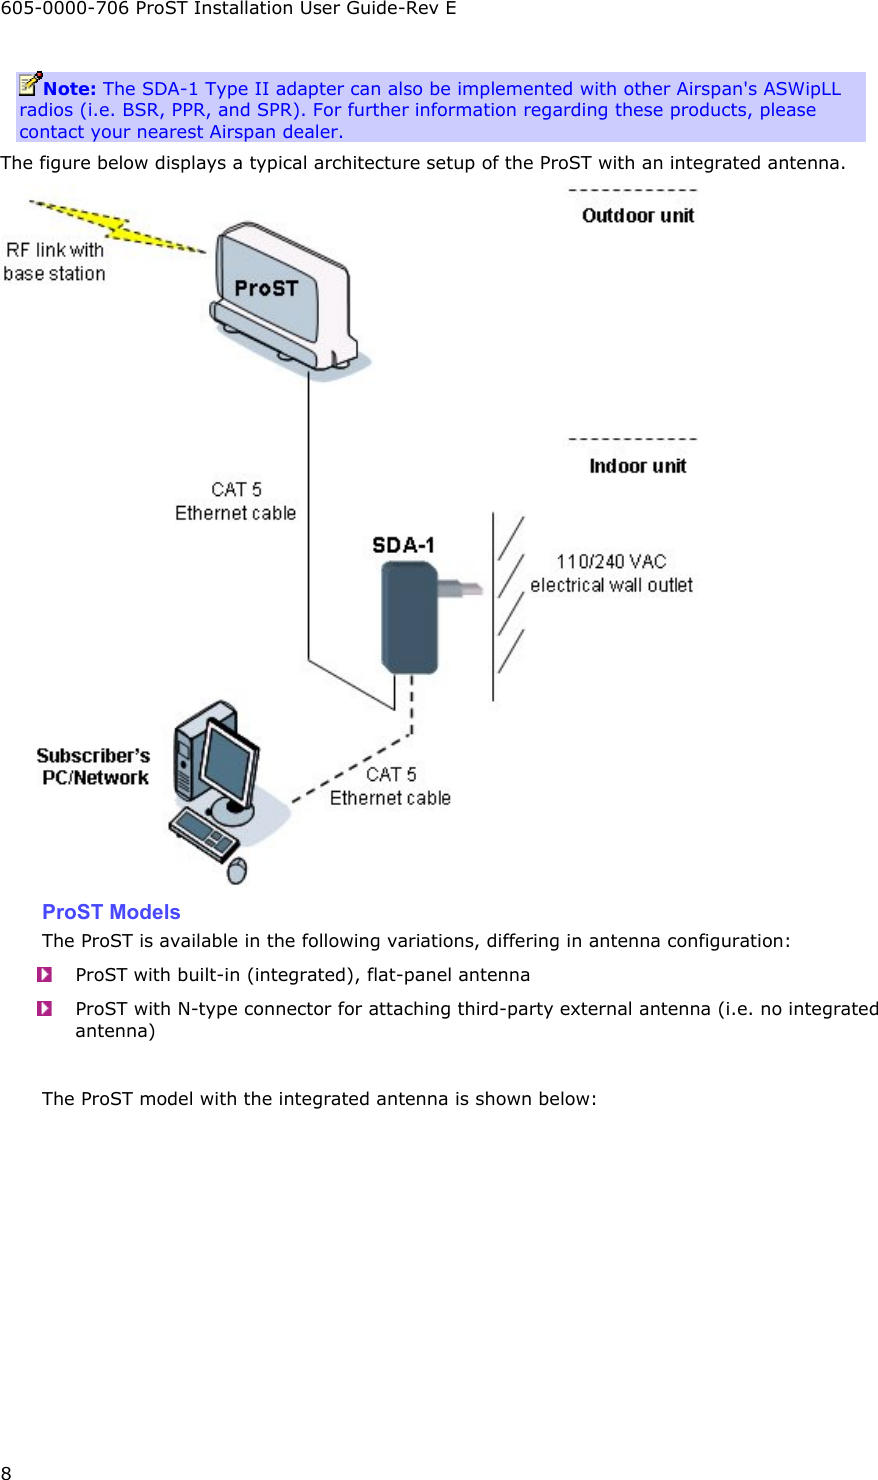 605-0000-706 ProST Installation User Guide-Rev E 8 Note: The SDA-1 Type II adapter can also be implemented with other Airspan&apos;s ASWipLL radios (i.e. BSR, PPR, and SPR). For further information regarding these products, please contact your nearest Airspan dealer. The figure below displays a typical architecture setup of the ProST with an integrated antenna.  ProST Models The ProST is available in the following variations, differing in antenna configuration:   ProST with built-in (integrated), flat-panel antenna   ProST with N-type connector for attaching third-party external antenna (i.e. no integrated antenna)  The ProST model with the integrated antenna is shown below: 